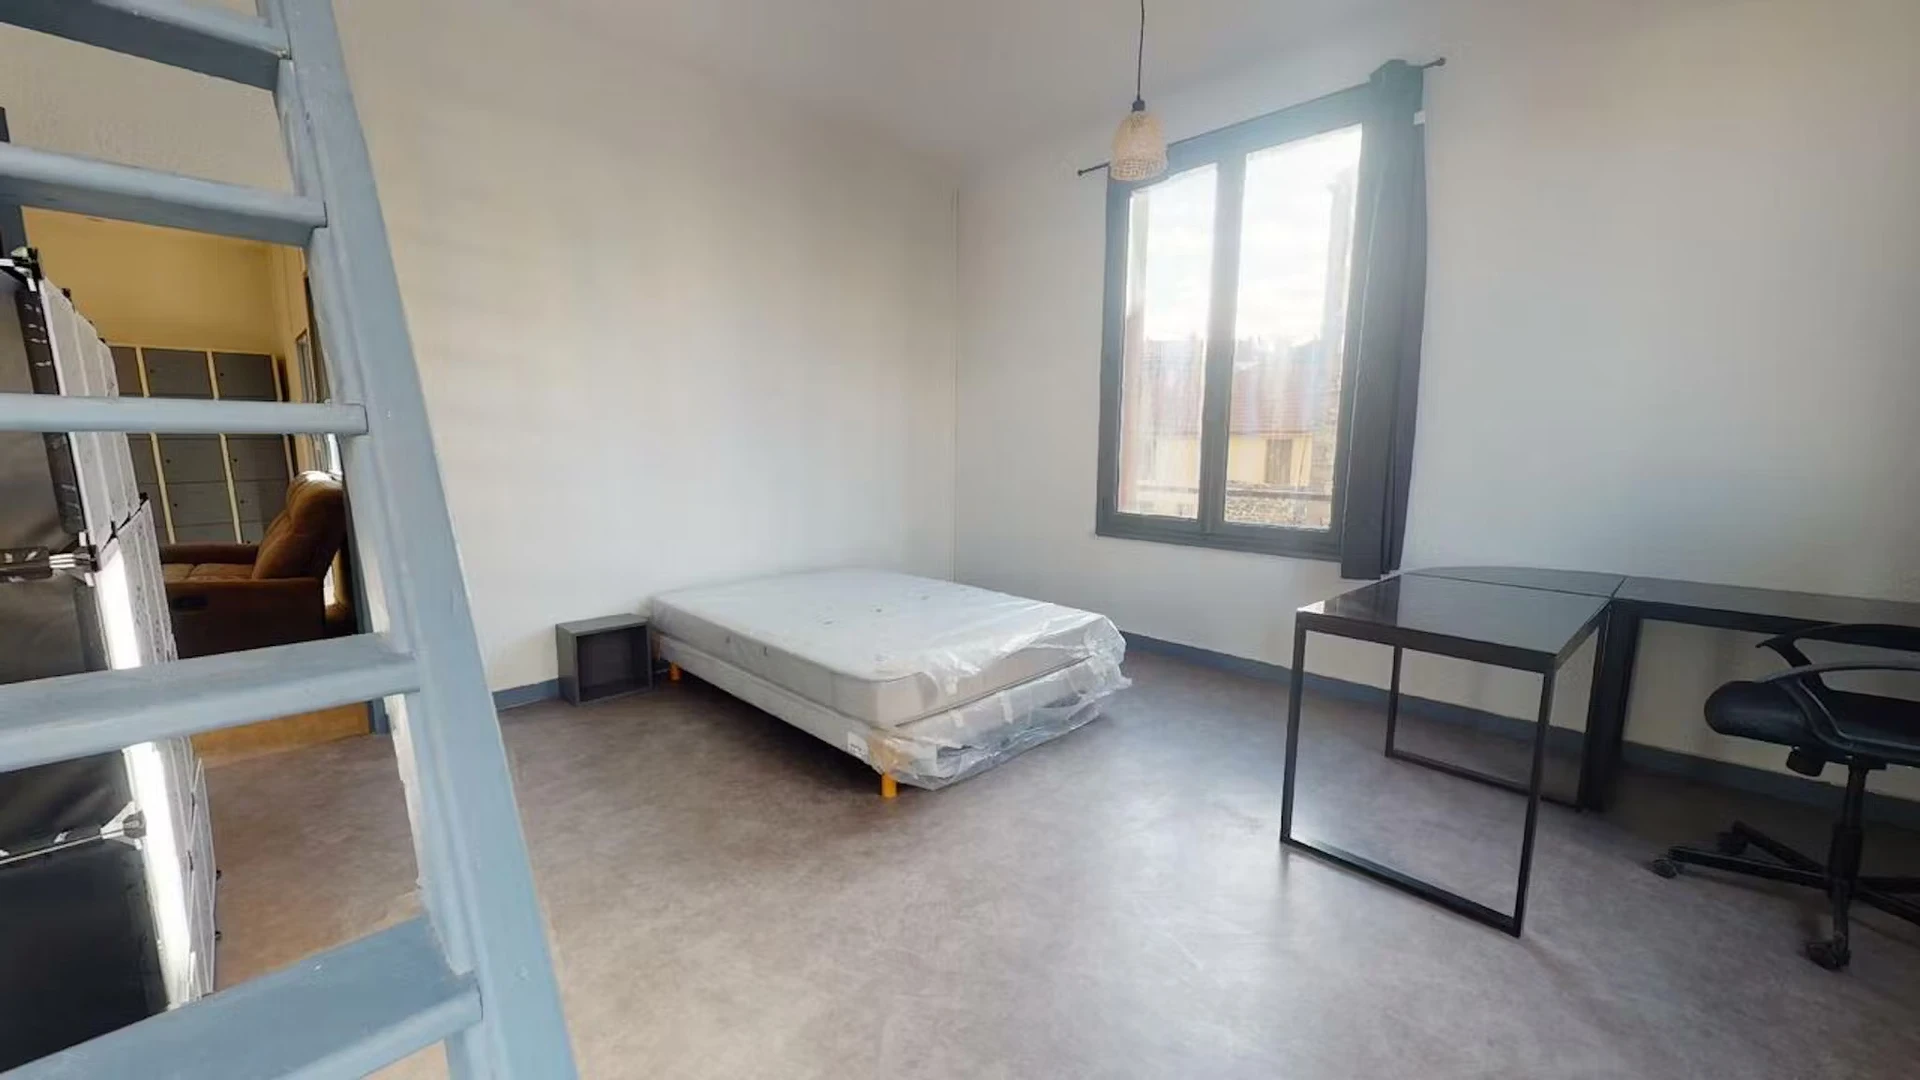 Room for rent with double bed Clermont-ferrand